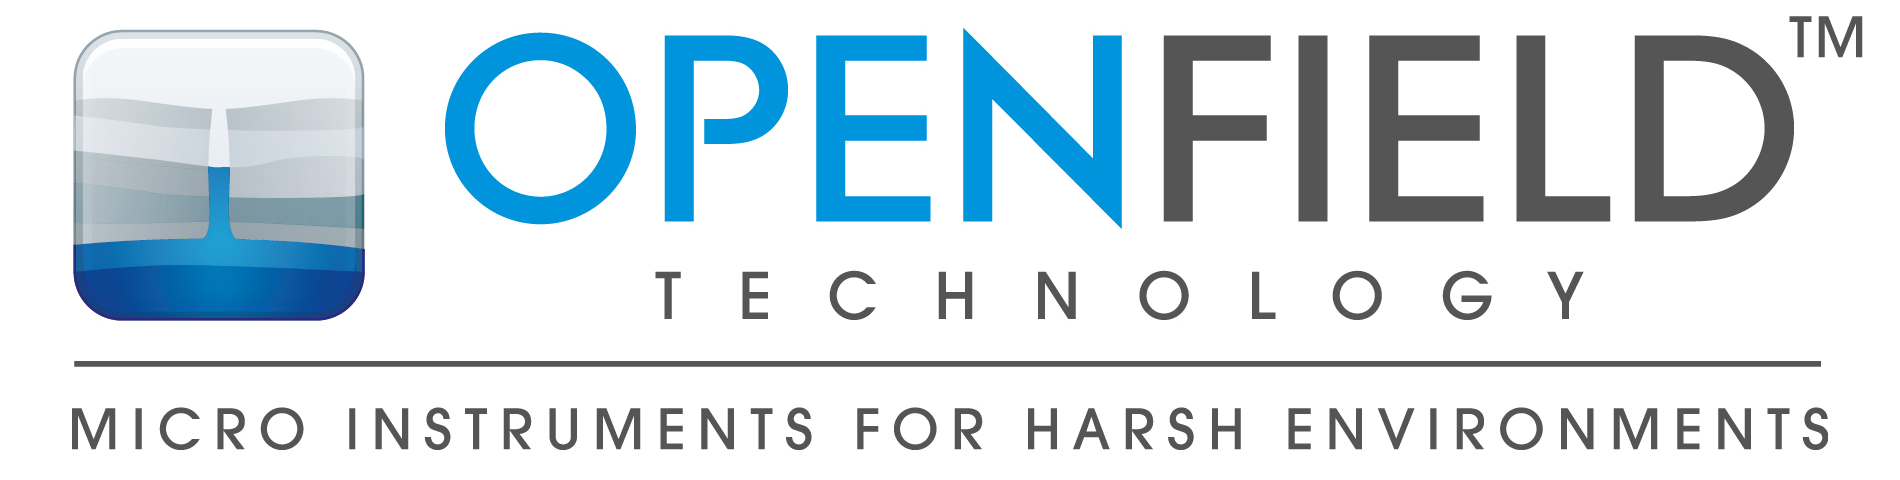 Openfield Technology